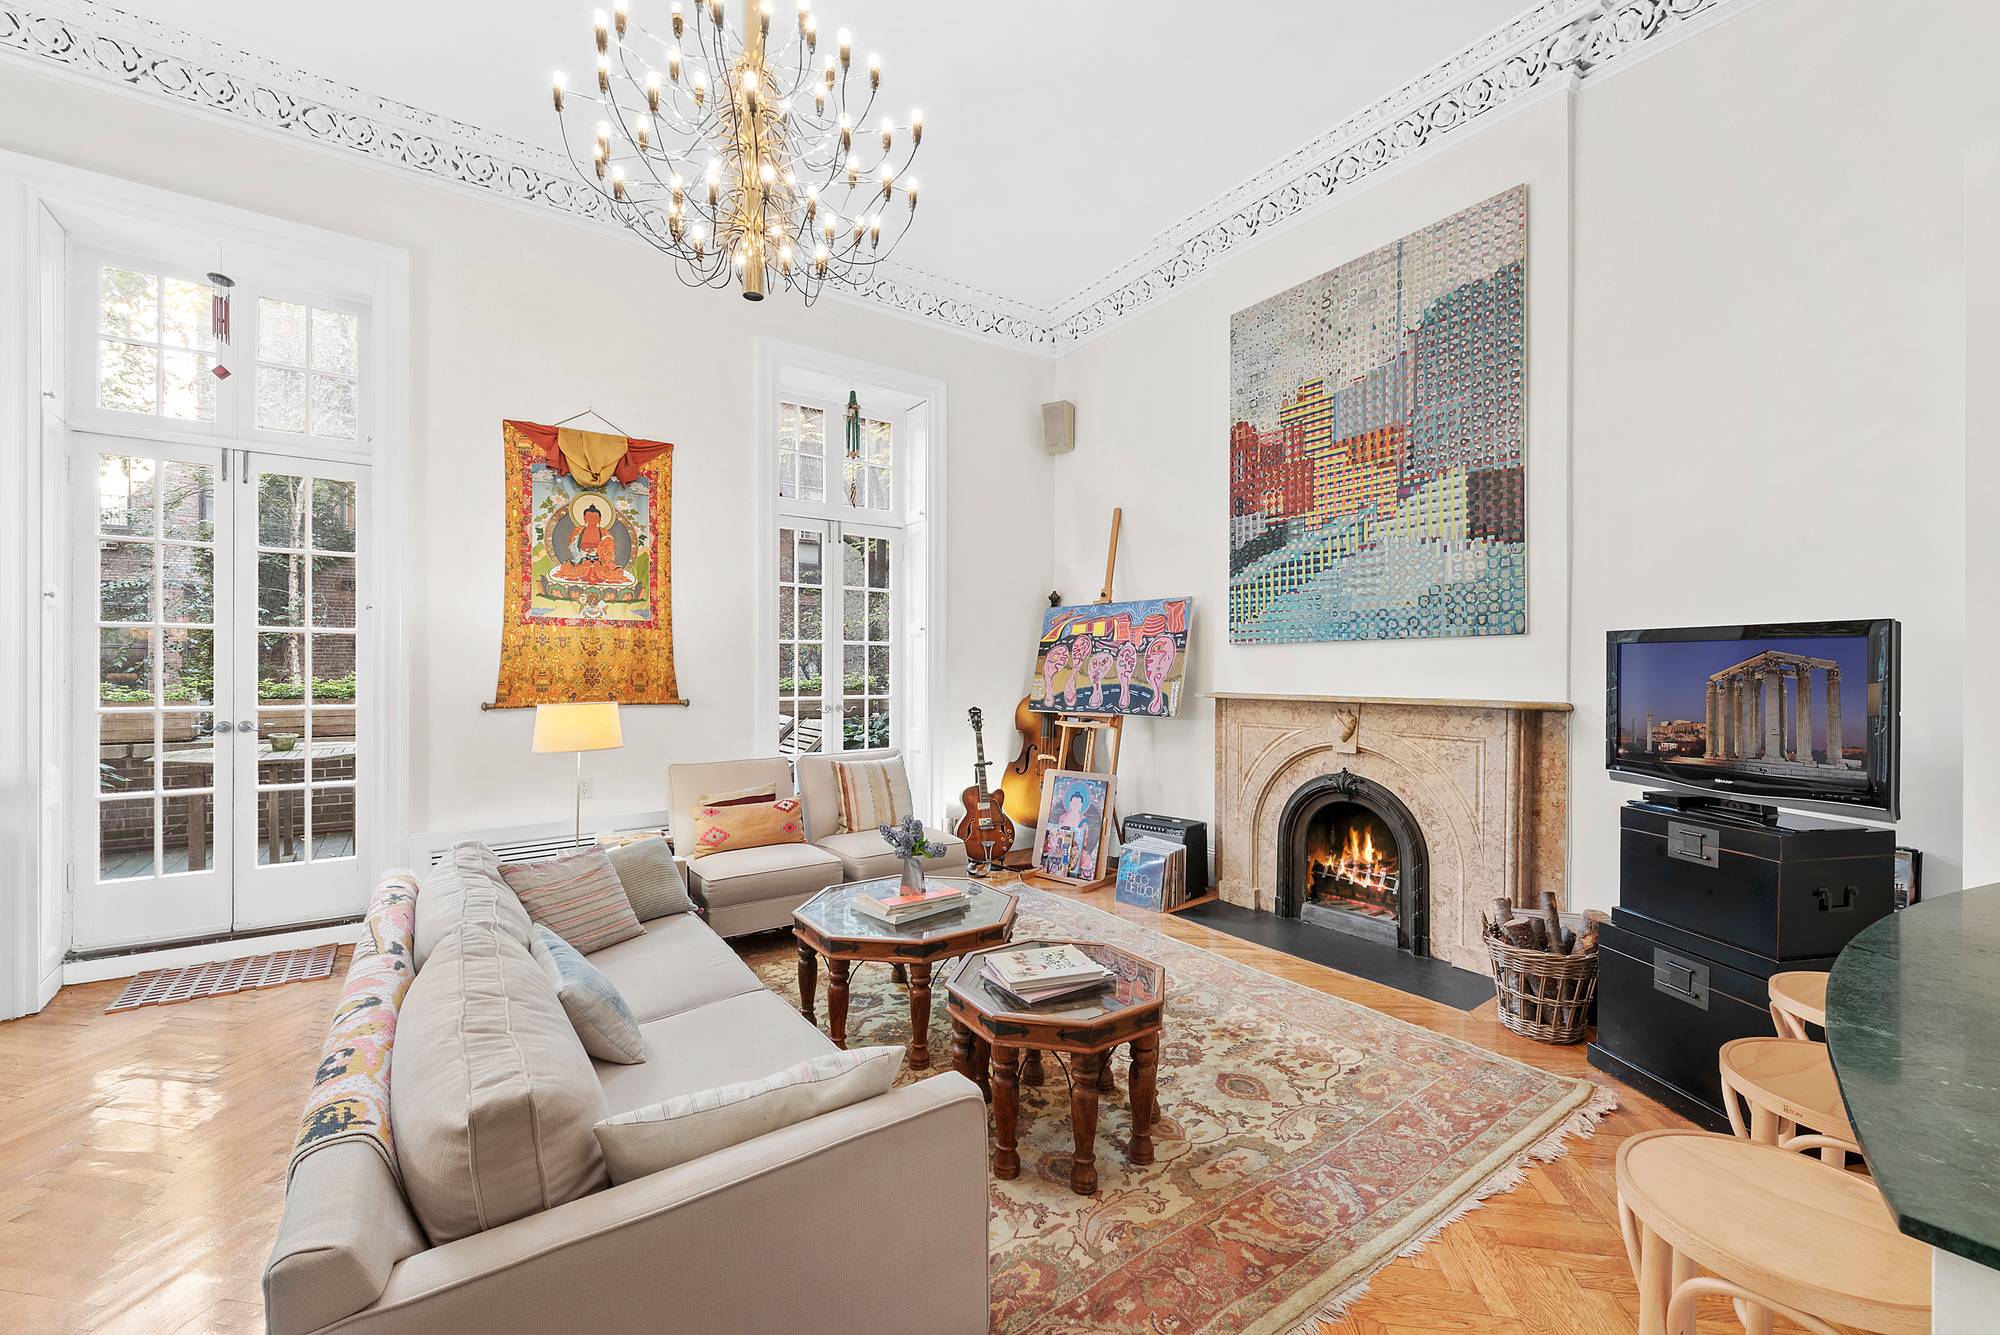 137 East 15th Street Rare opportunity to own a sunny parlor floor 2 bedroom, 2 bath duplex with private outdoor space in a 19th century townhouse !